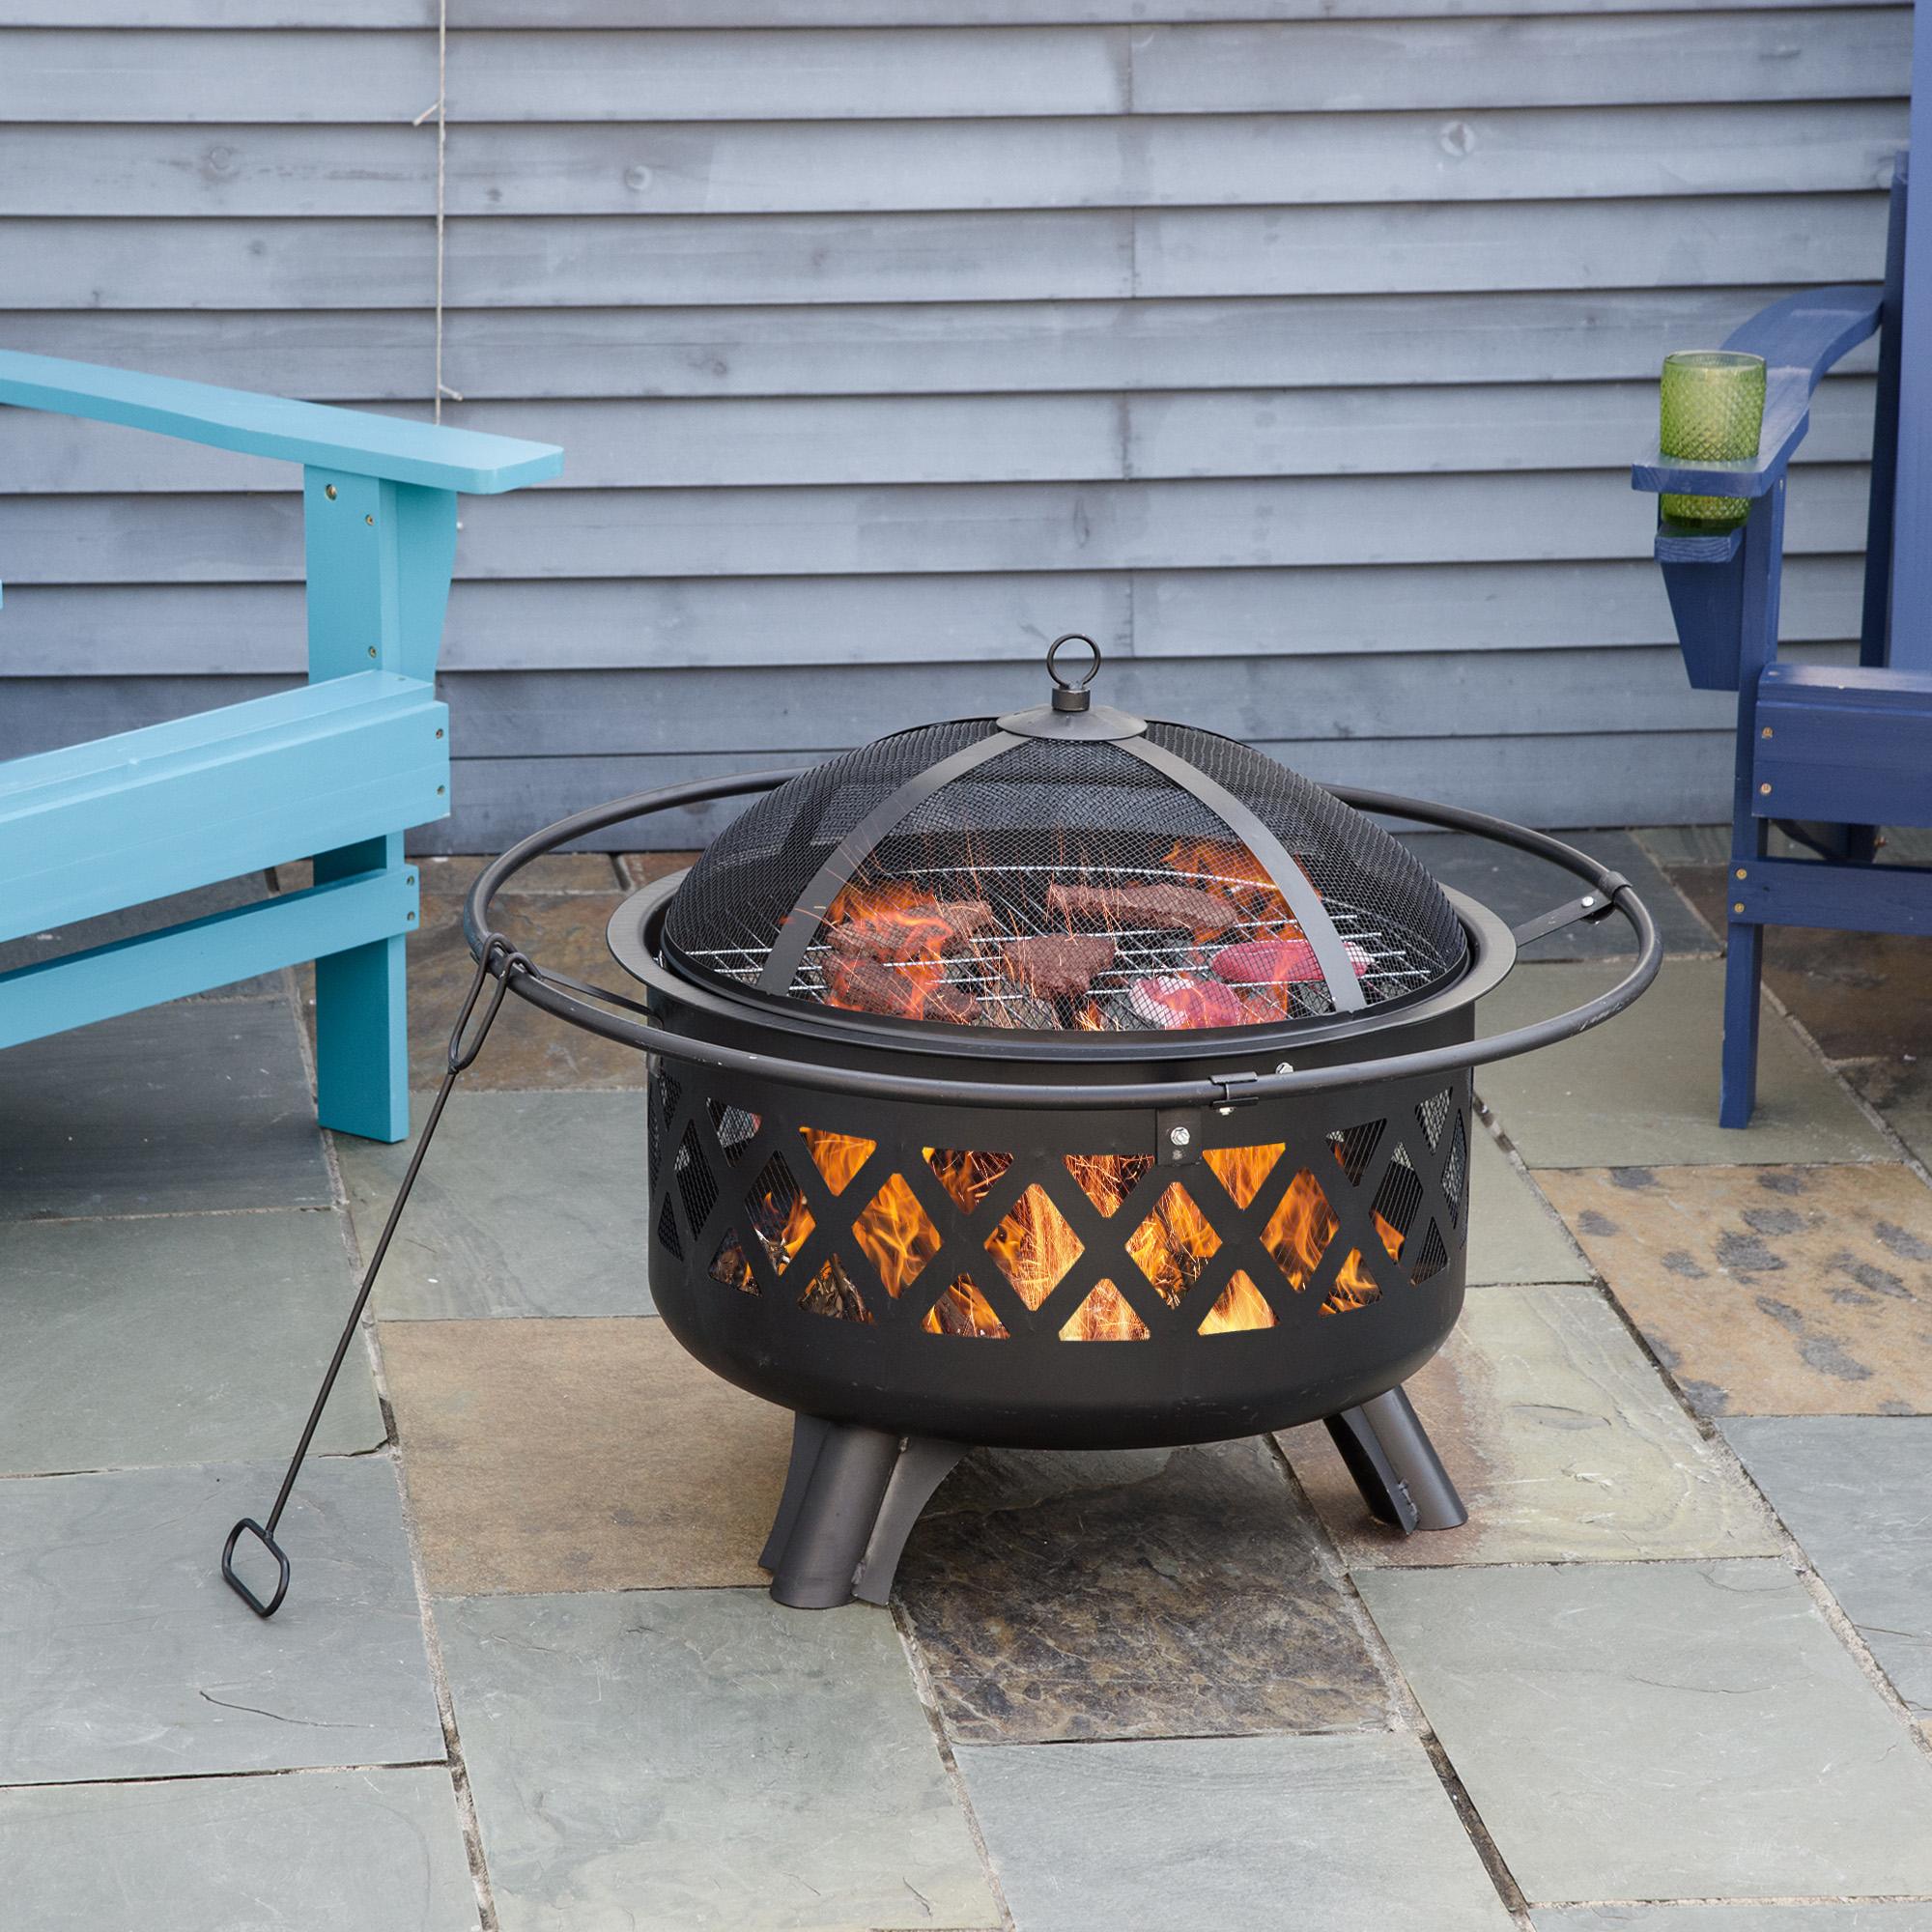 Outsunny 2-in-1 Outdoor Fire Pit with BBQ Grill, Patio Heater Log Wood  Charcoal Burner, Firepit Bowl with Spark Screen Cover, Poker for Backyard  